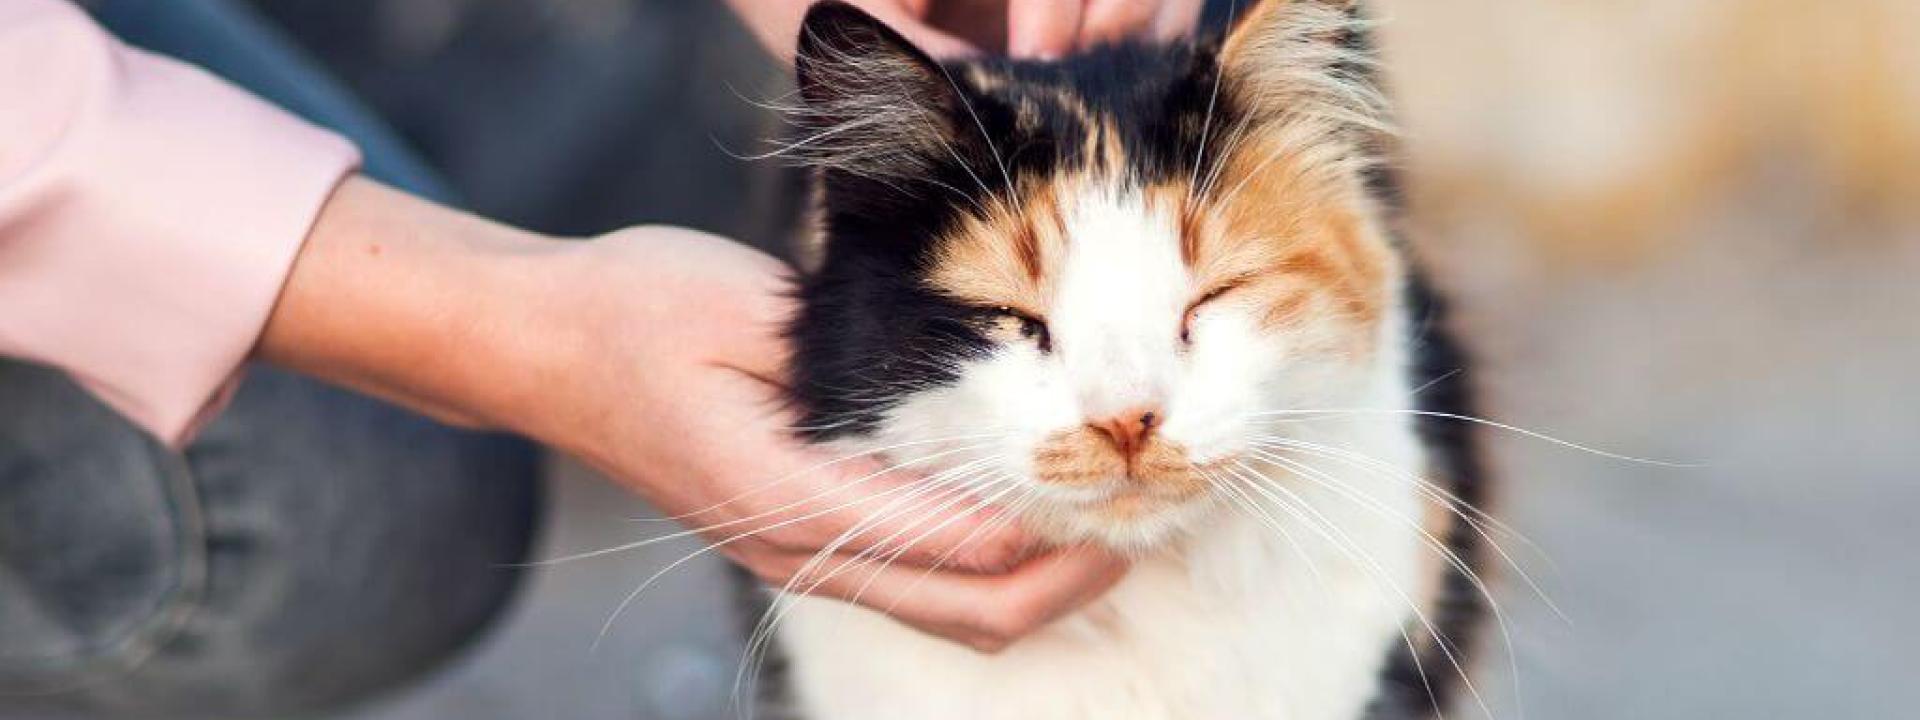 Calico cat being pet by owner.